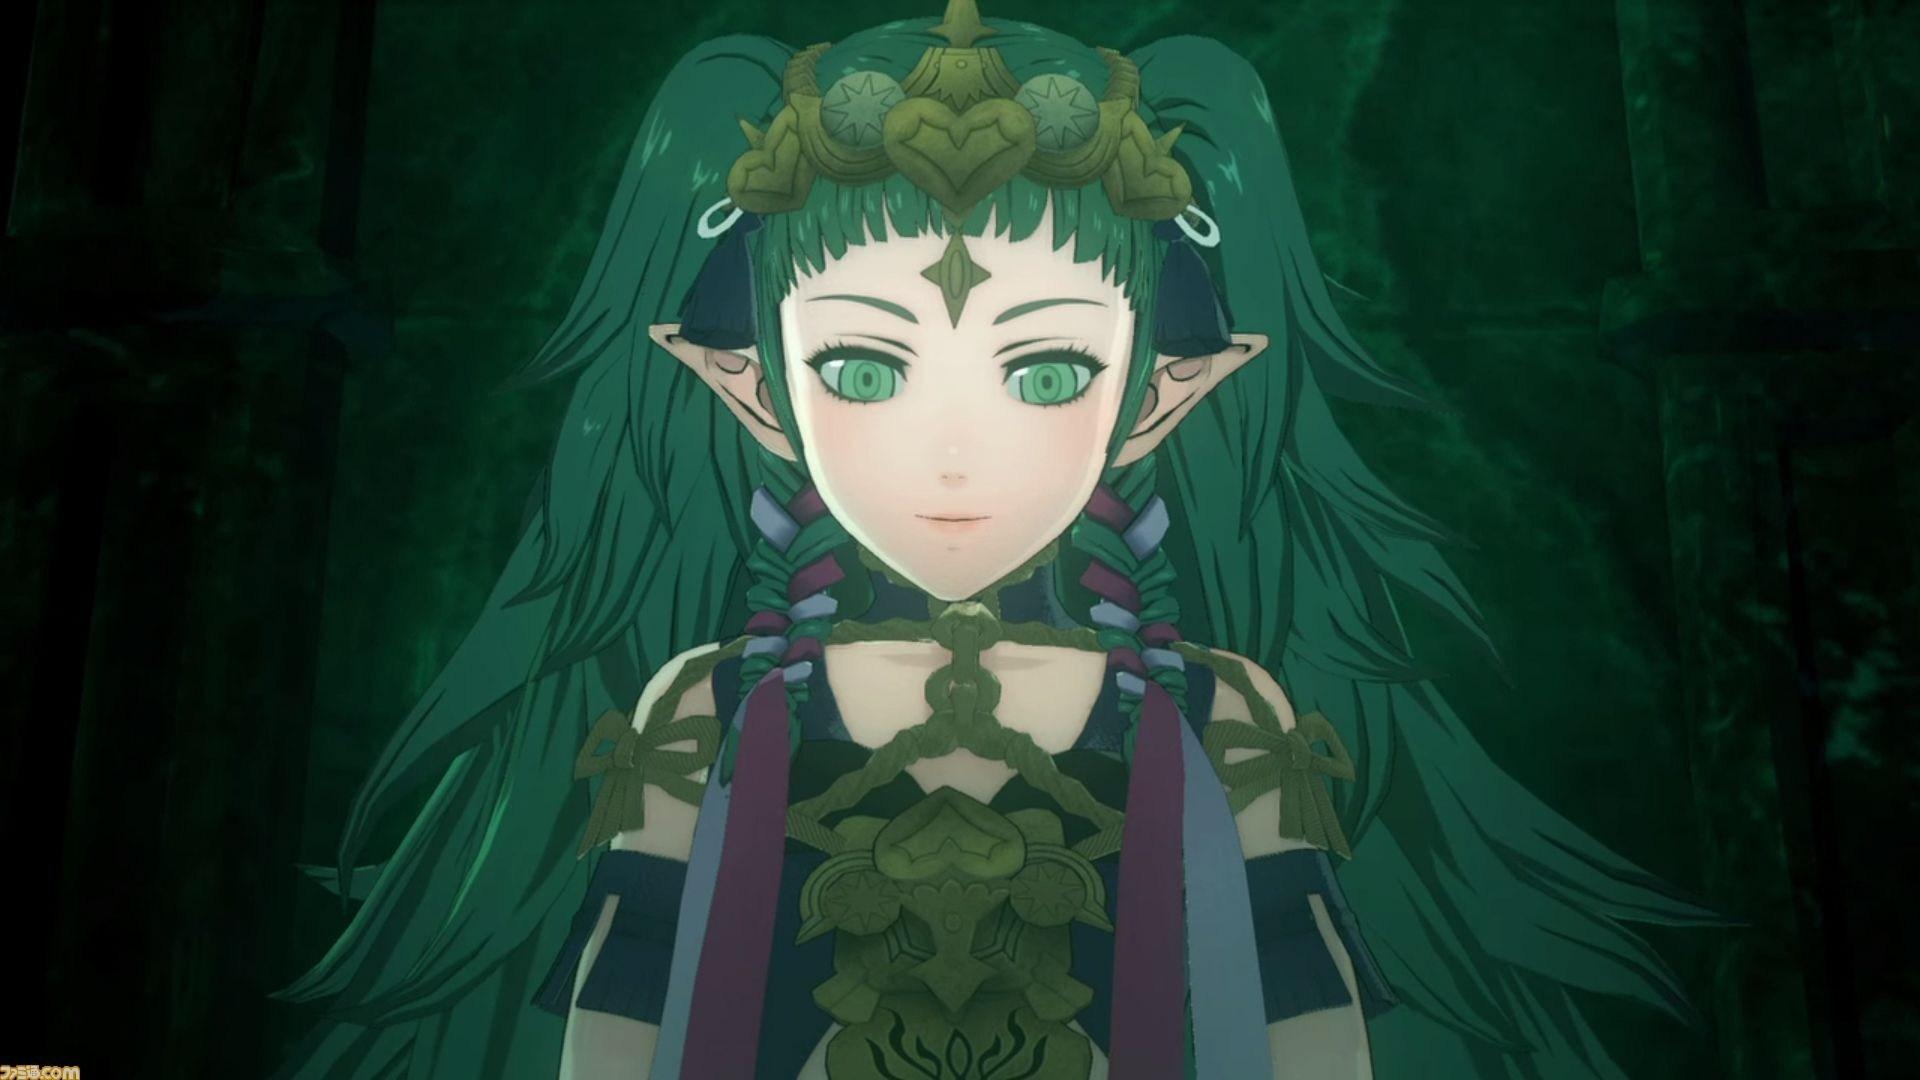 Fire Emblem: Three Houses Received a Plethora of New Update